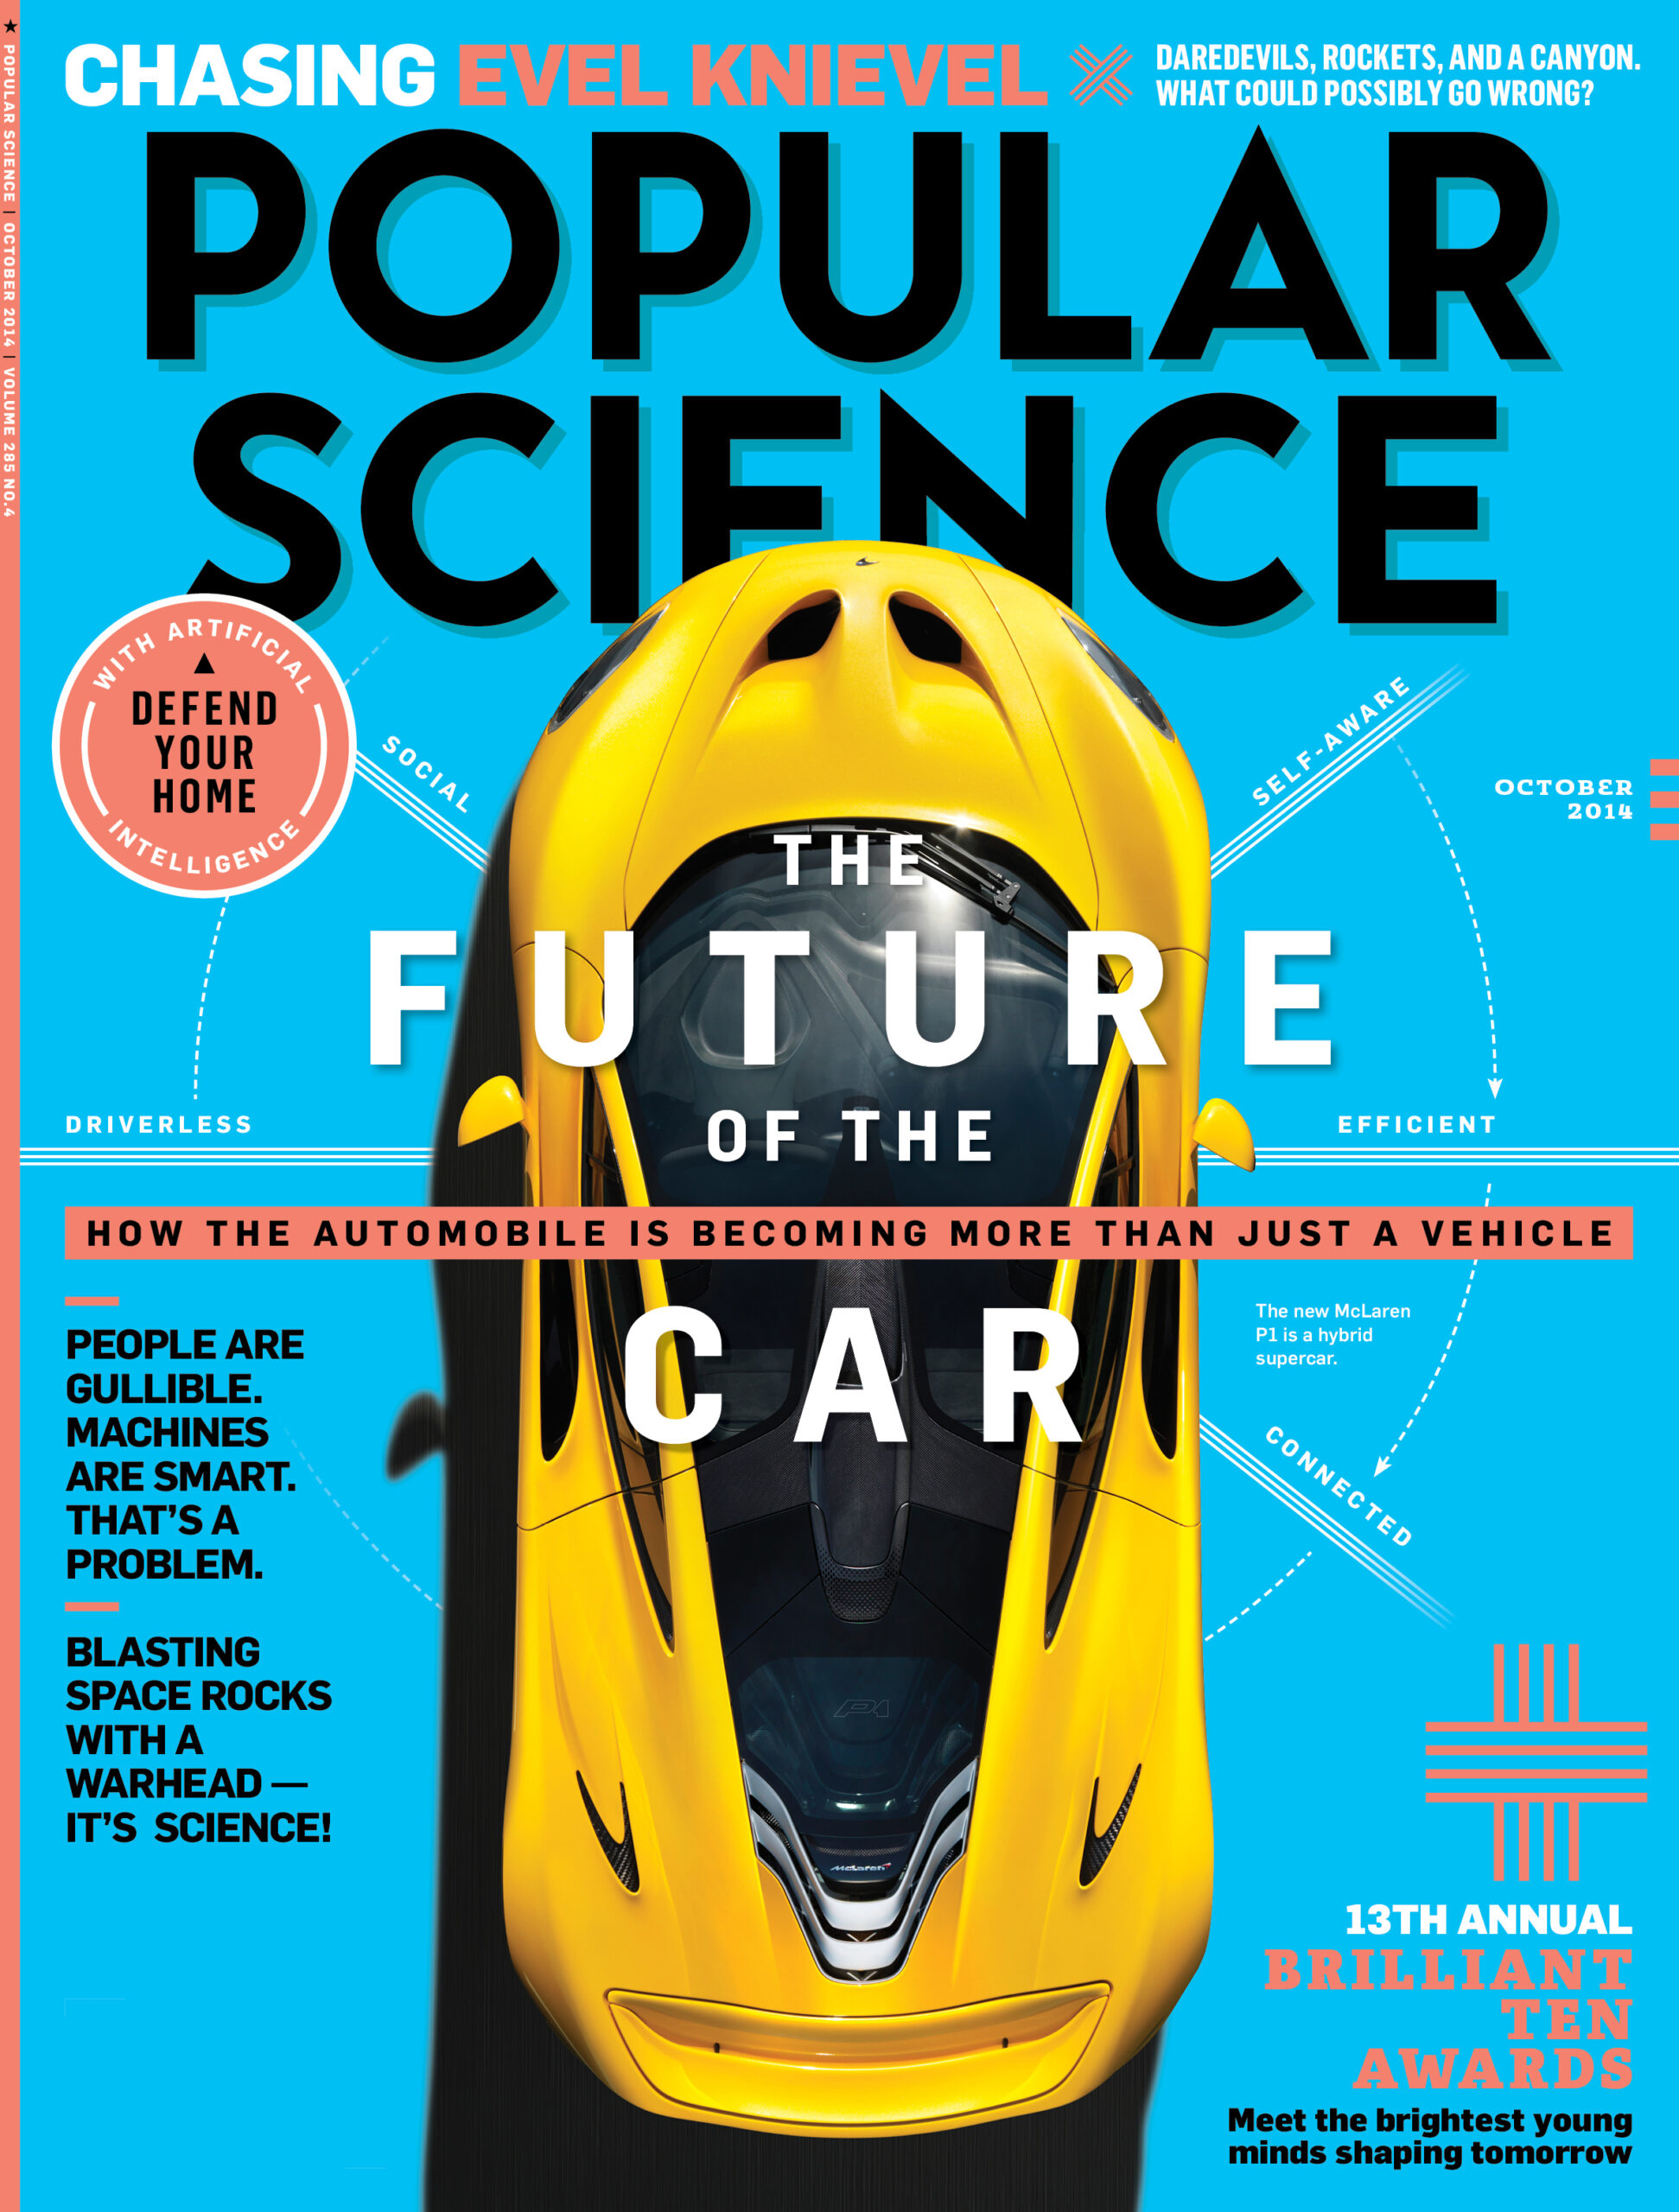 Now Live: The October 2014 Issue of Popular Science